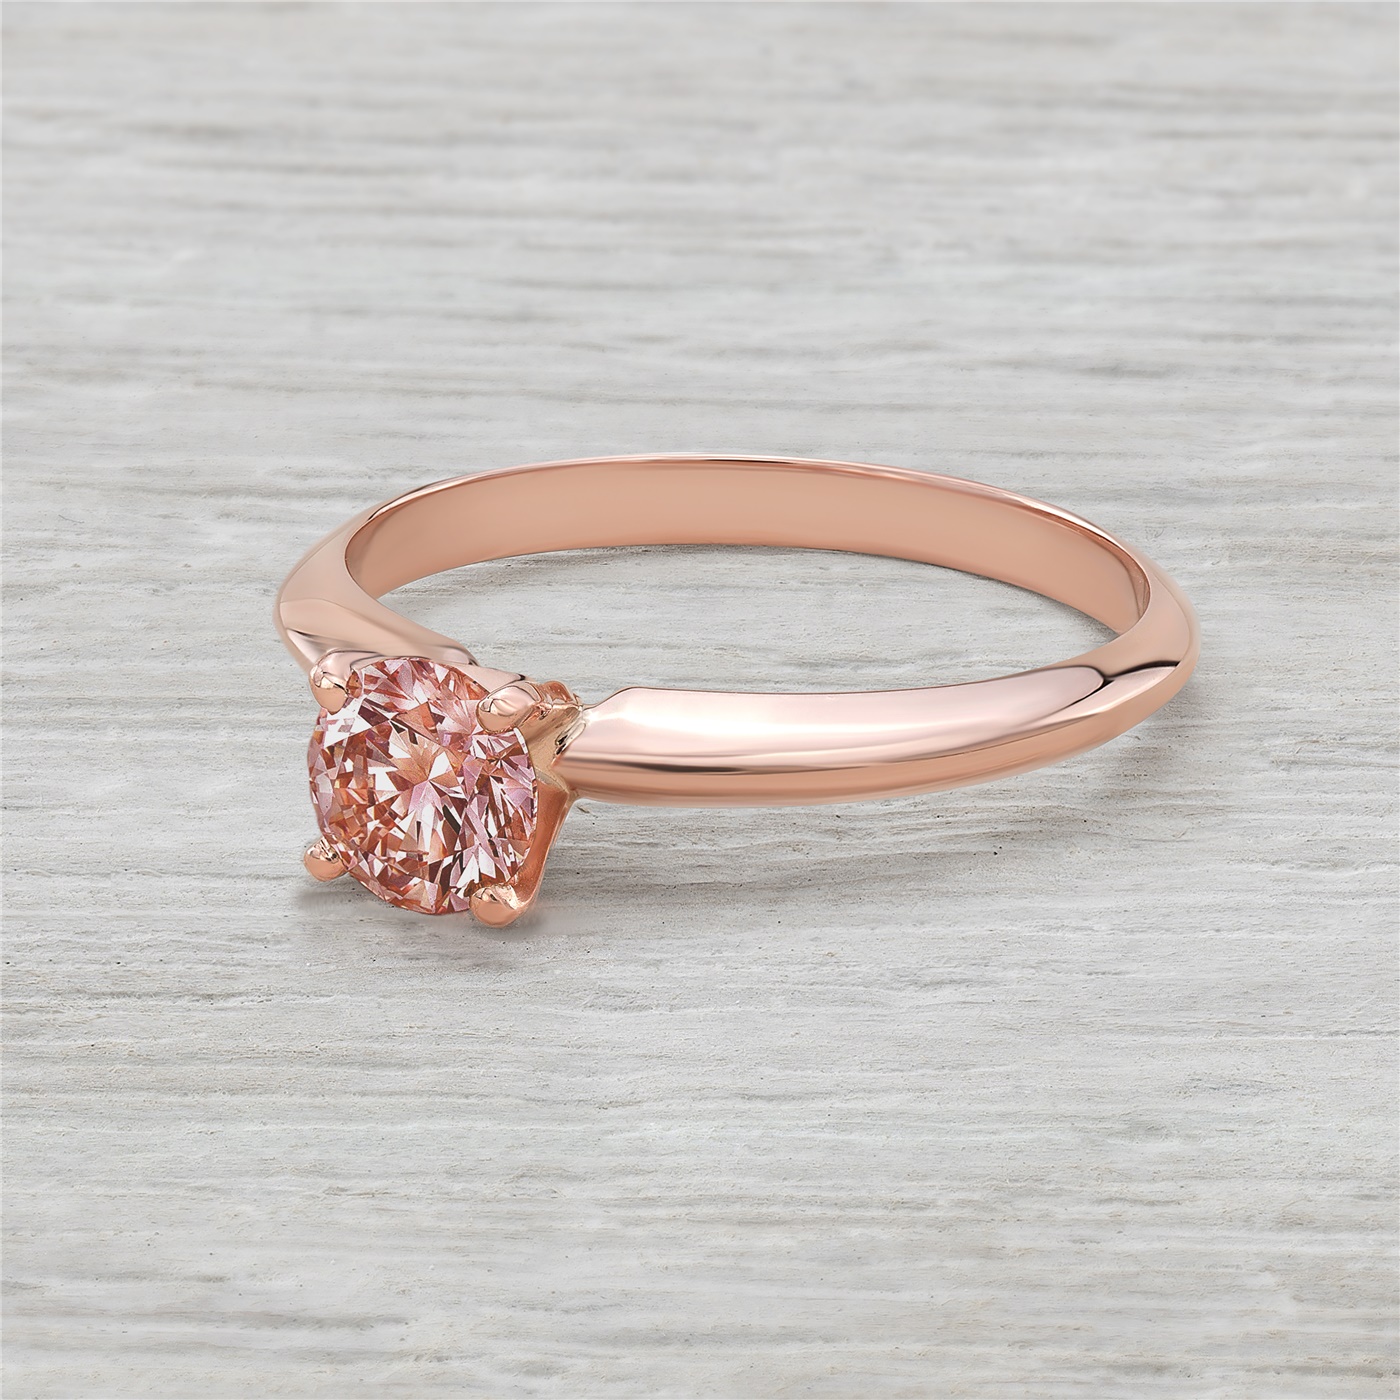 .54ct (half carat) Pink Diamond Solitaire Engagement Ring in 14K Rose Gold